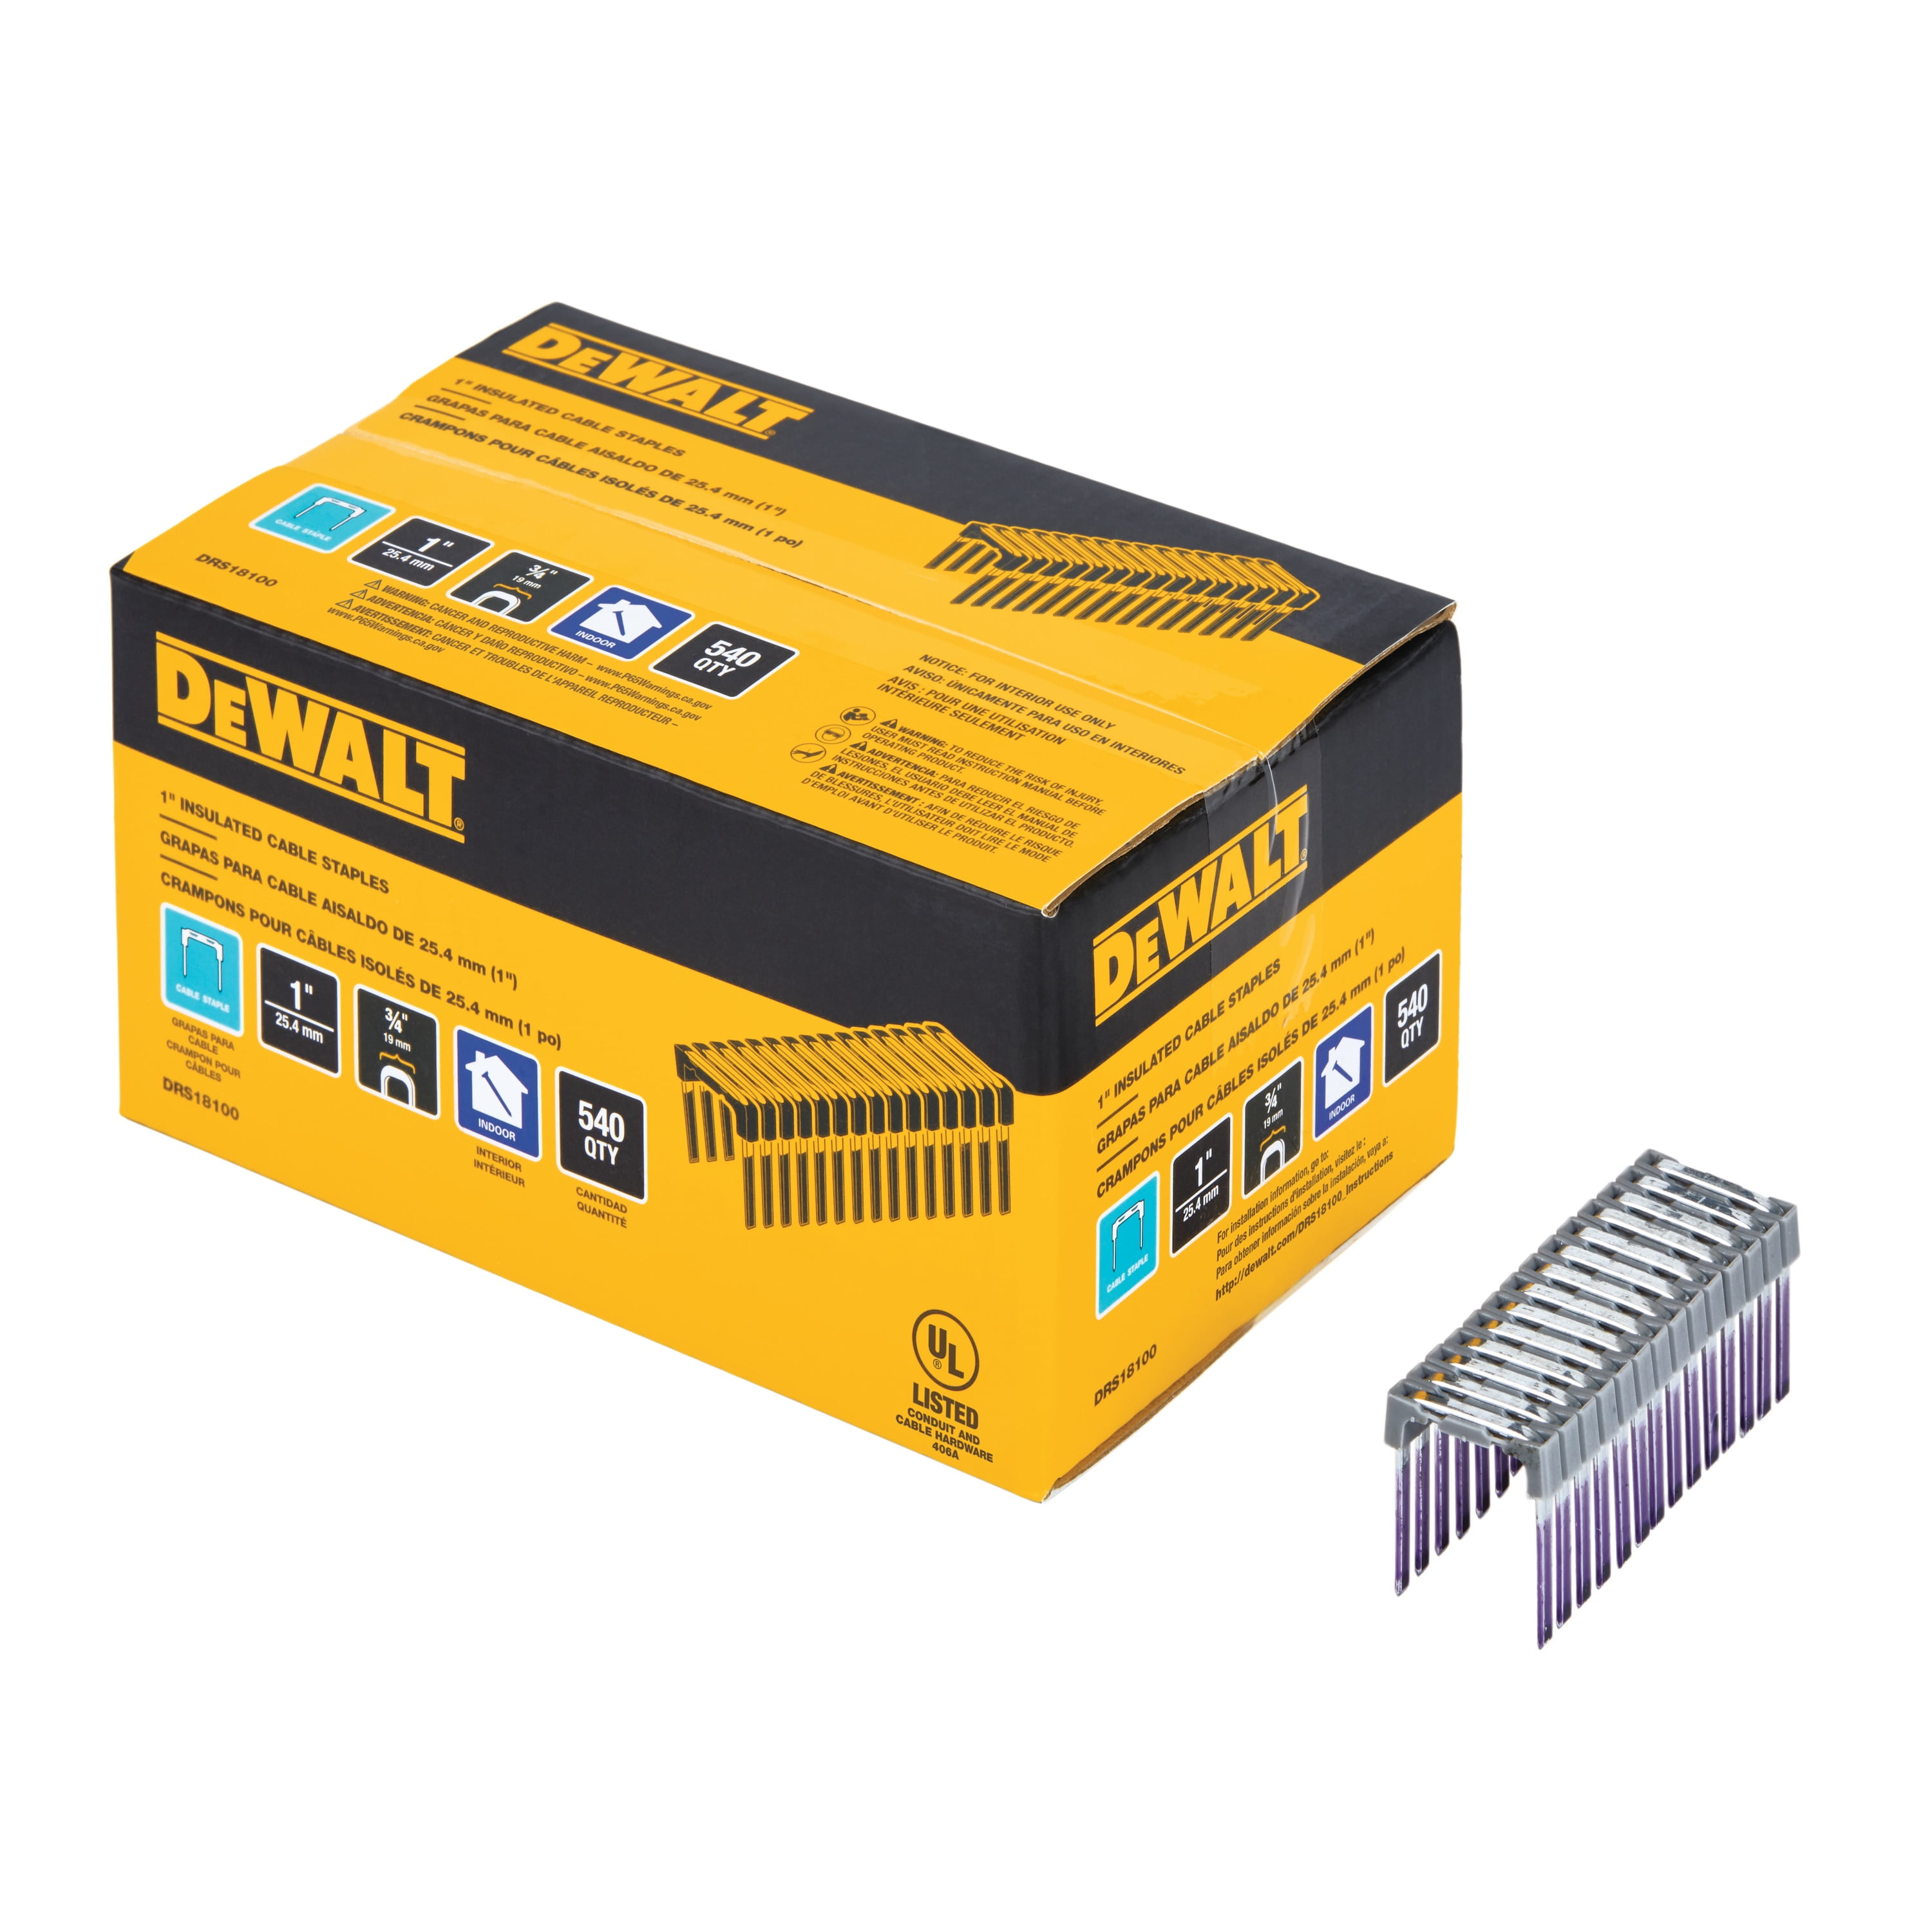 DEWALT DRS18100 1" Plastic Insulated Cable Staples, for